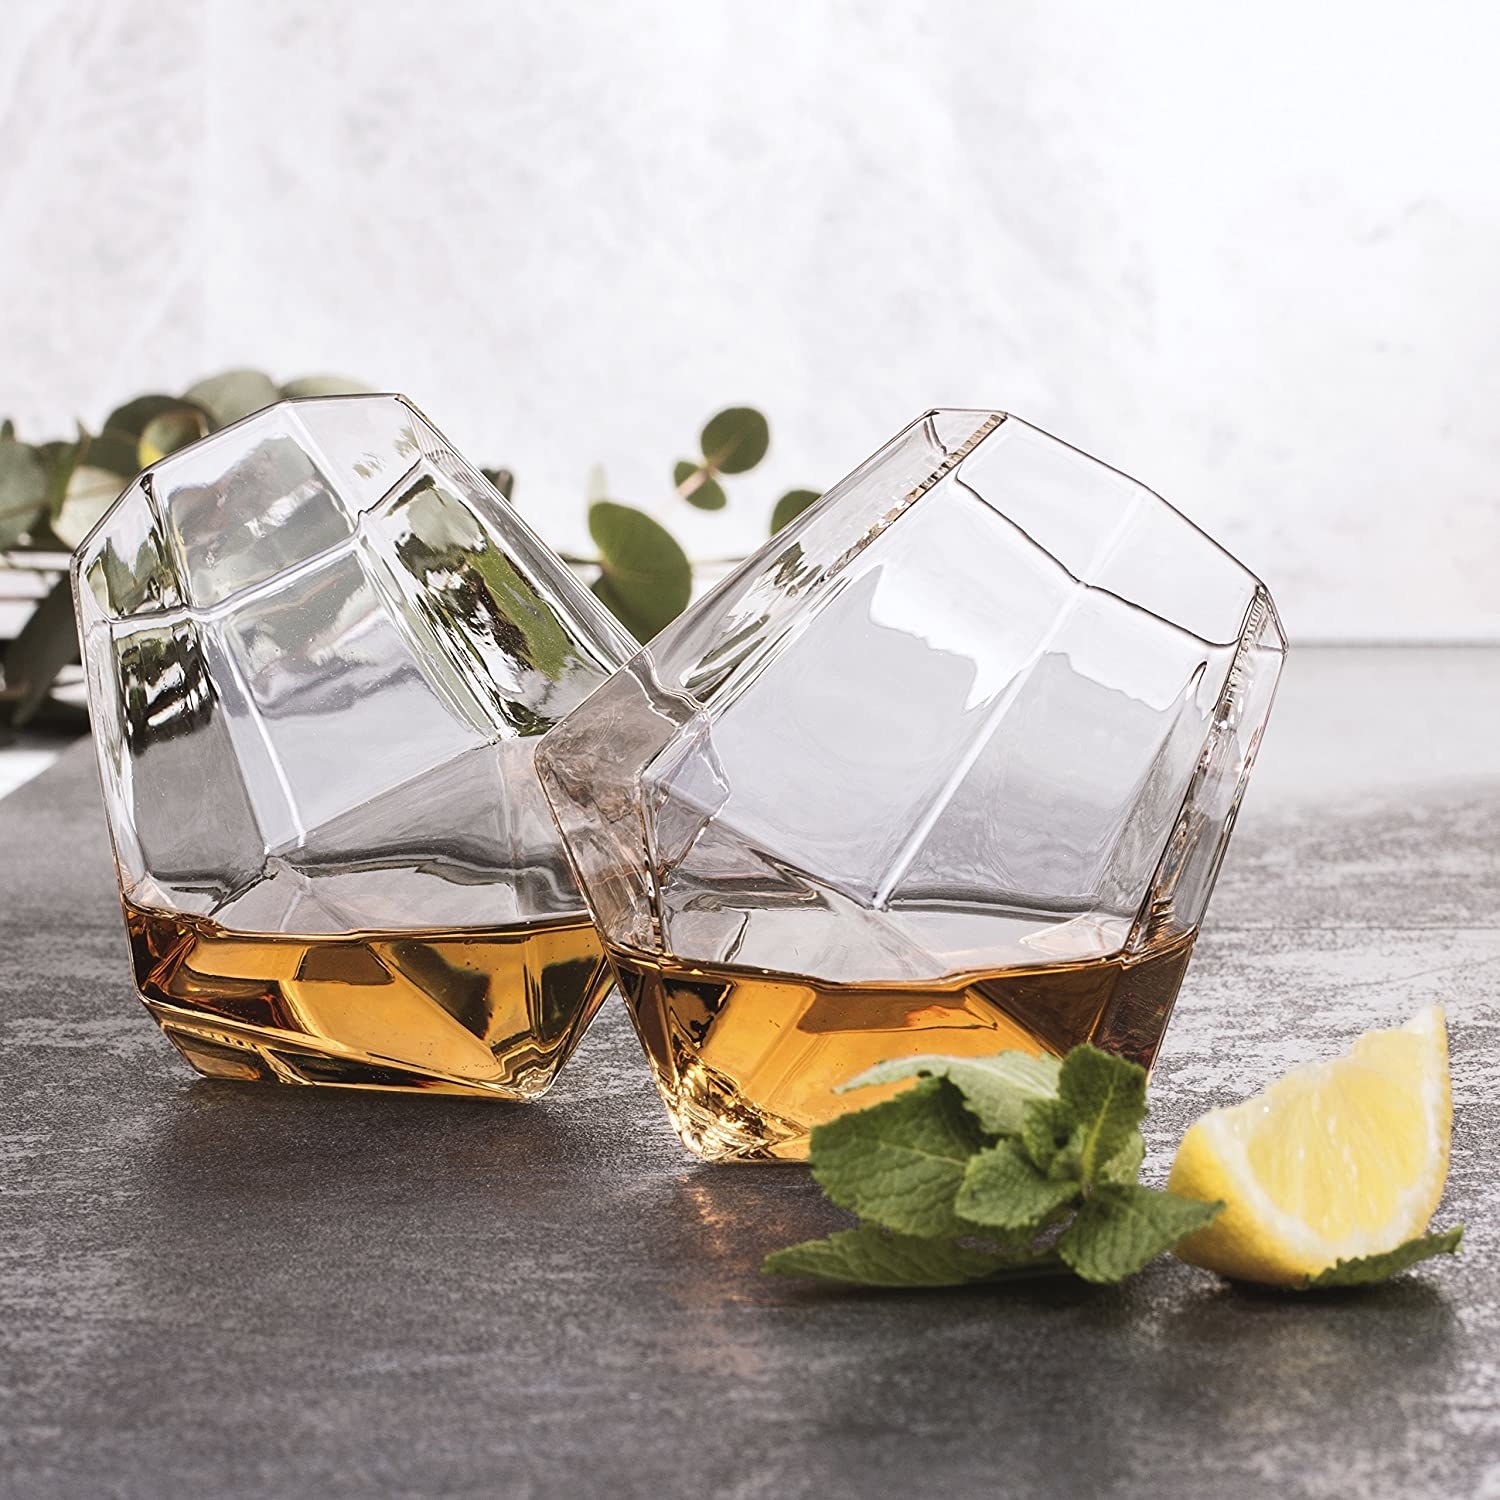 Two diamond-shaped tumblers filled with whiskey